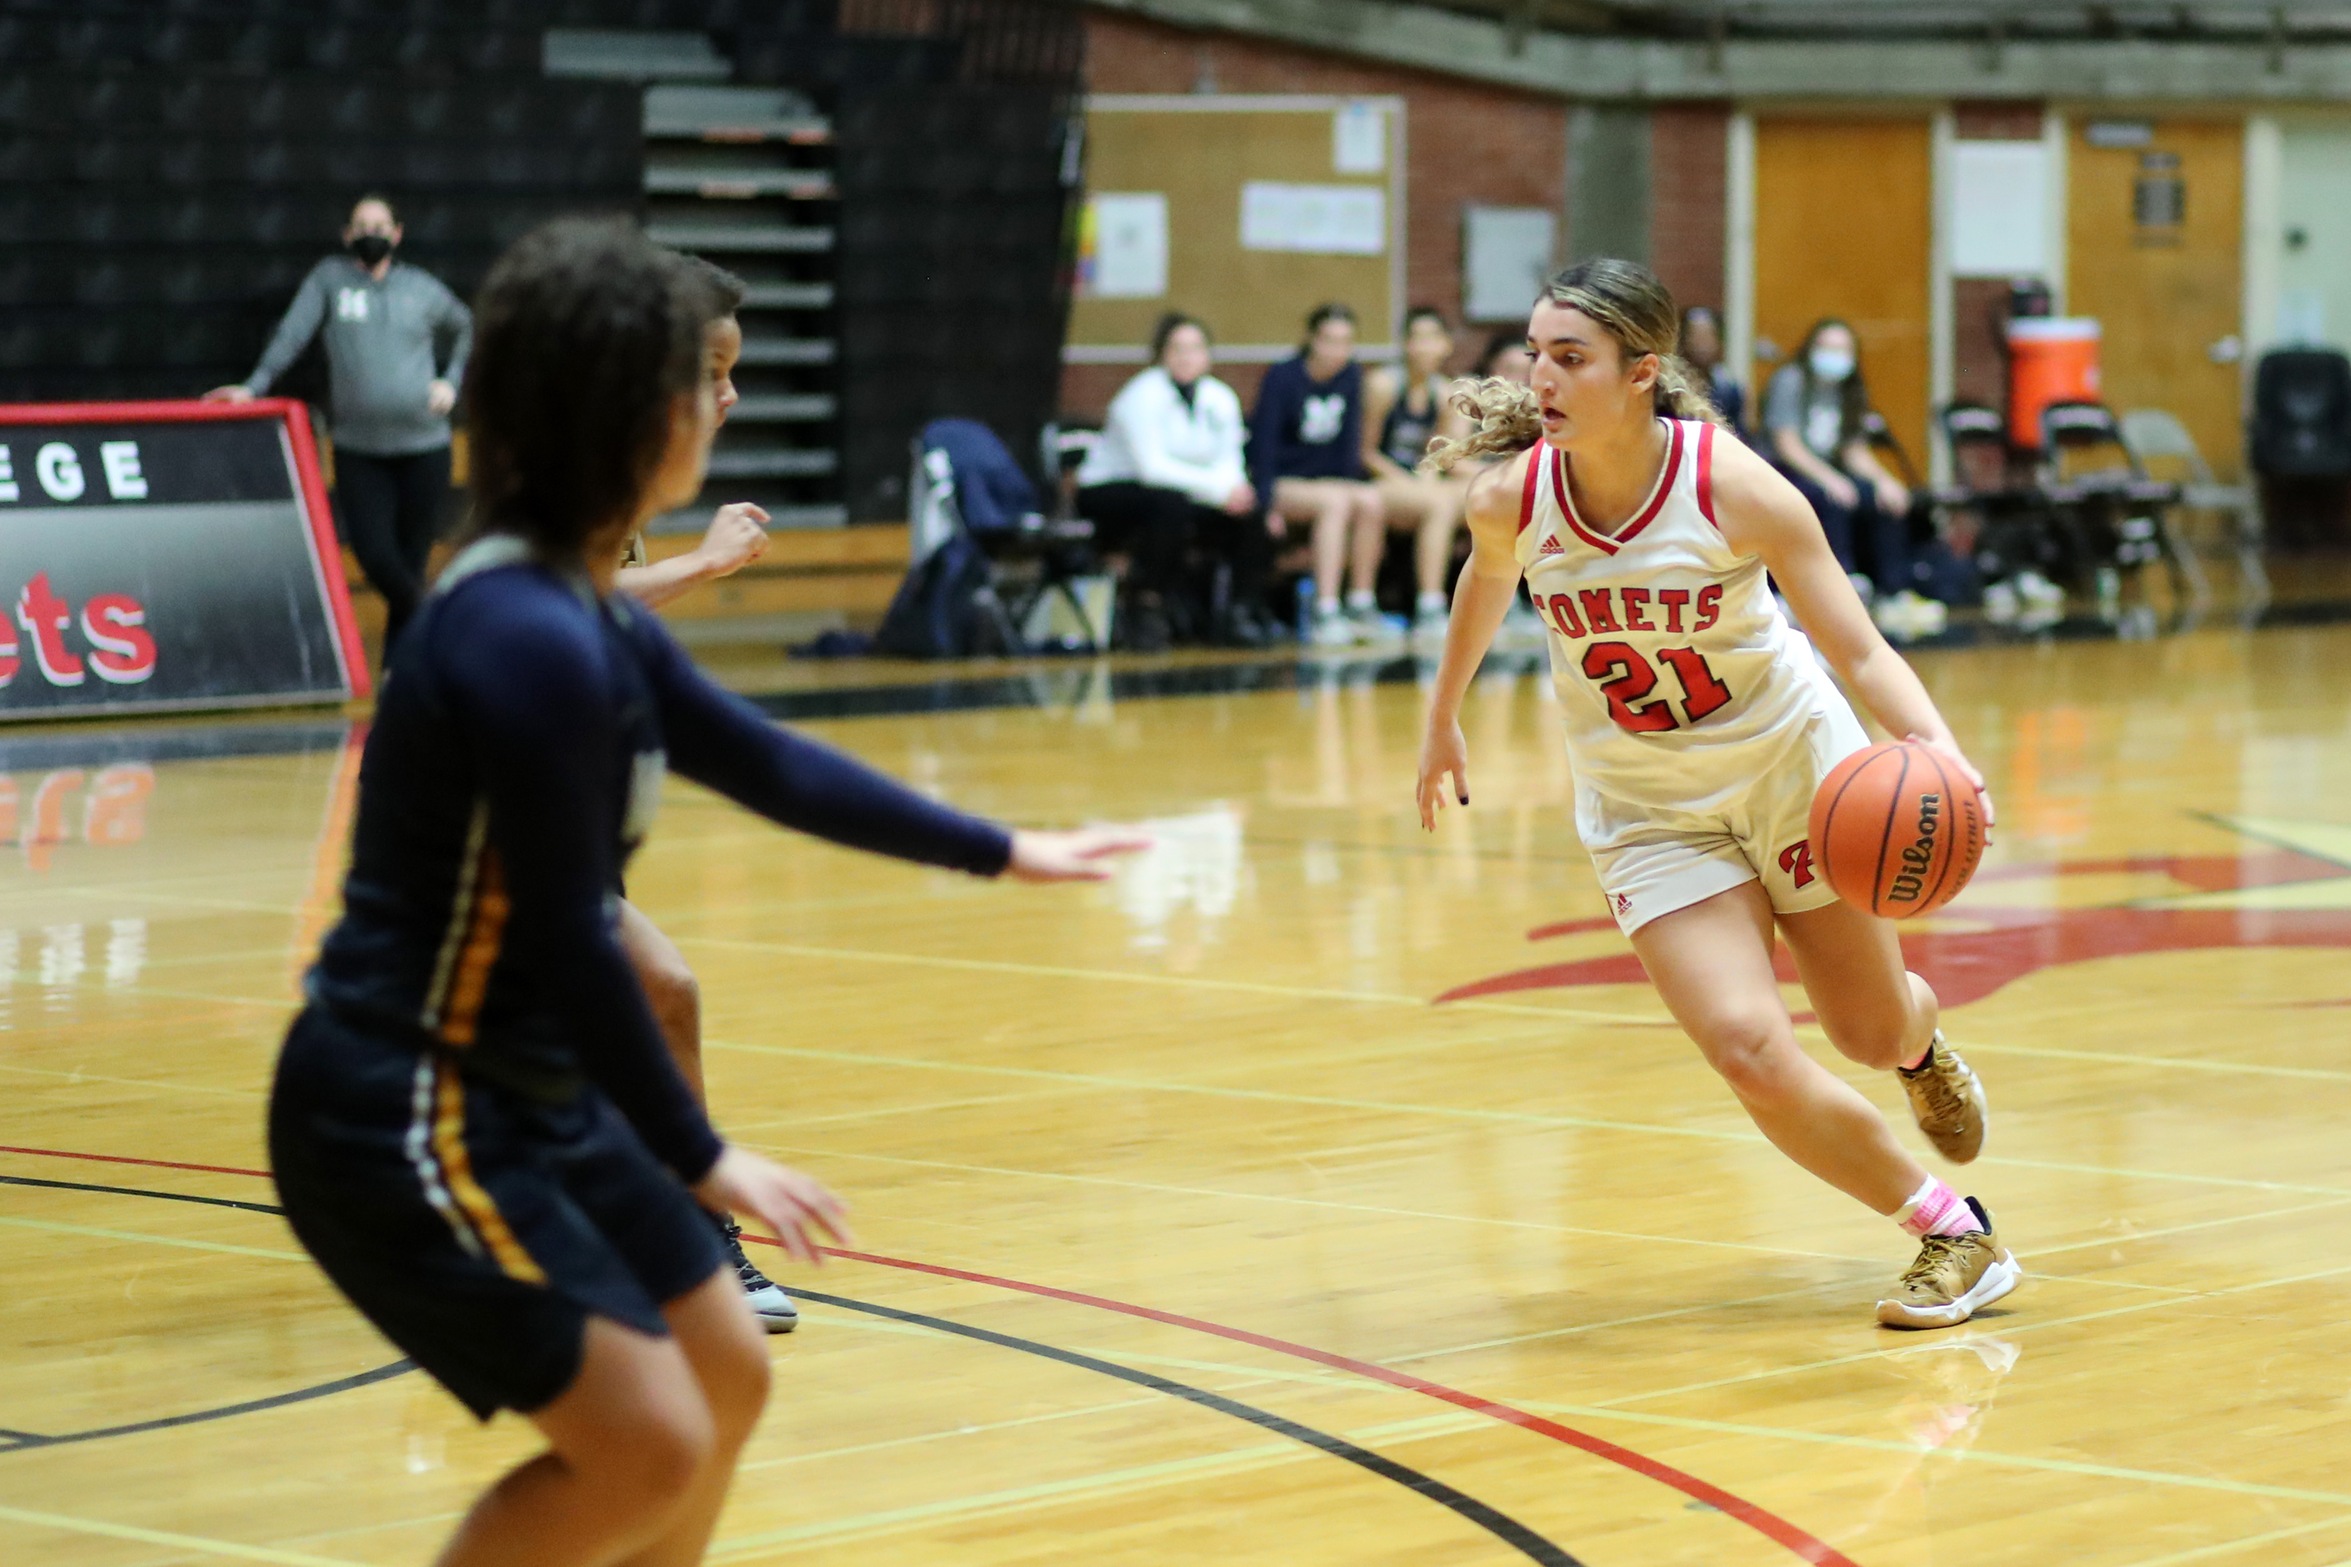 Sara Ahmadpour finished the night with 22 points and nine rebounds. Photo by Hugh Cox.